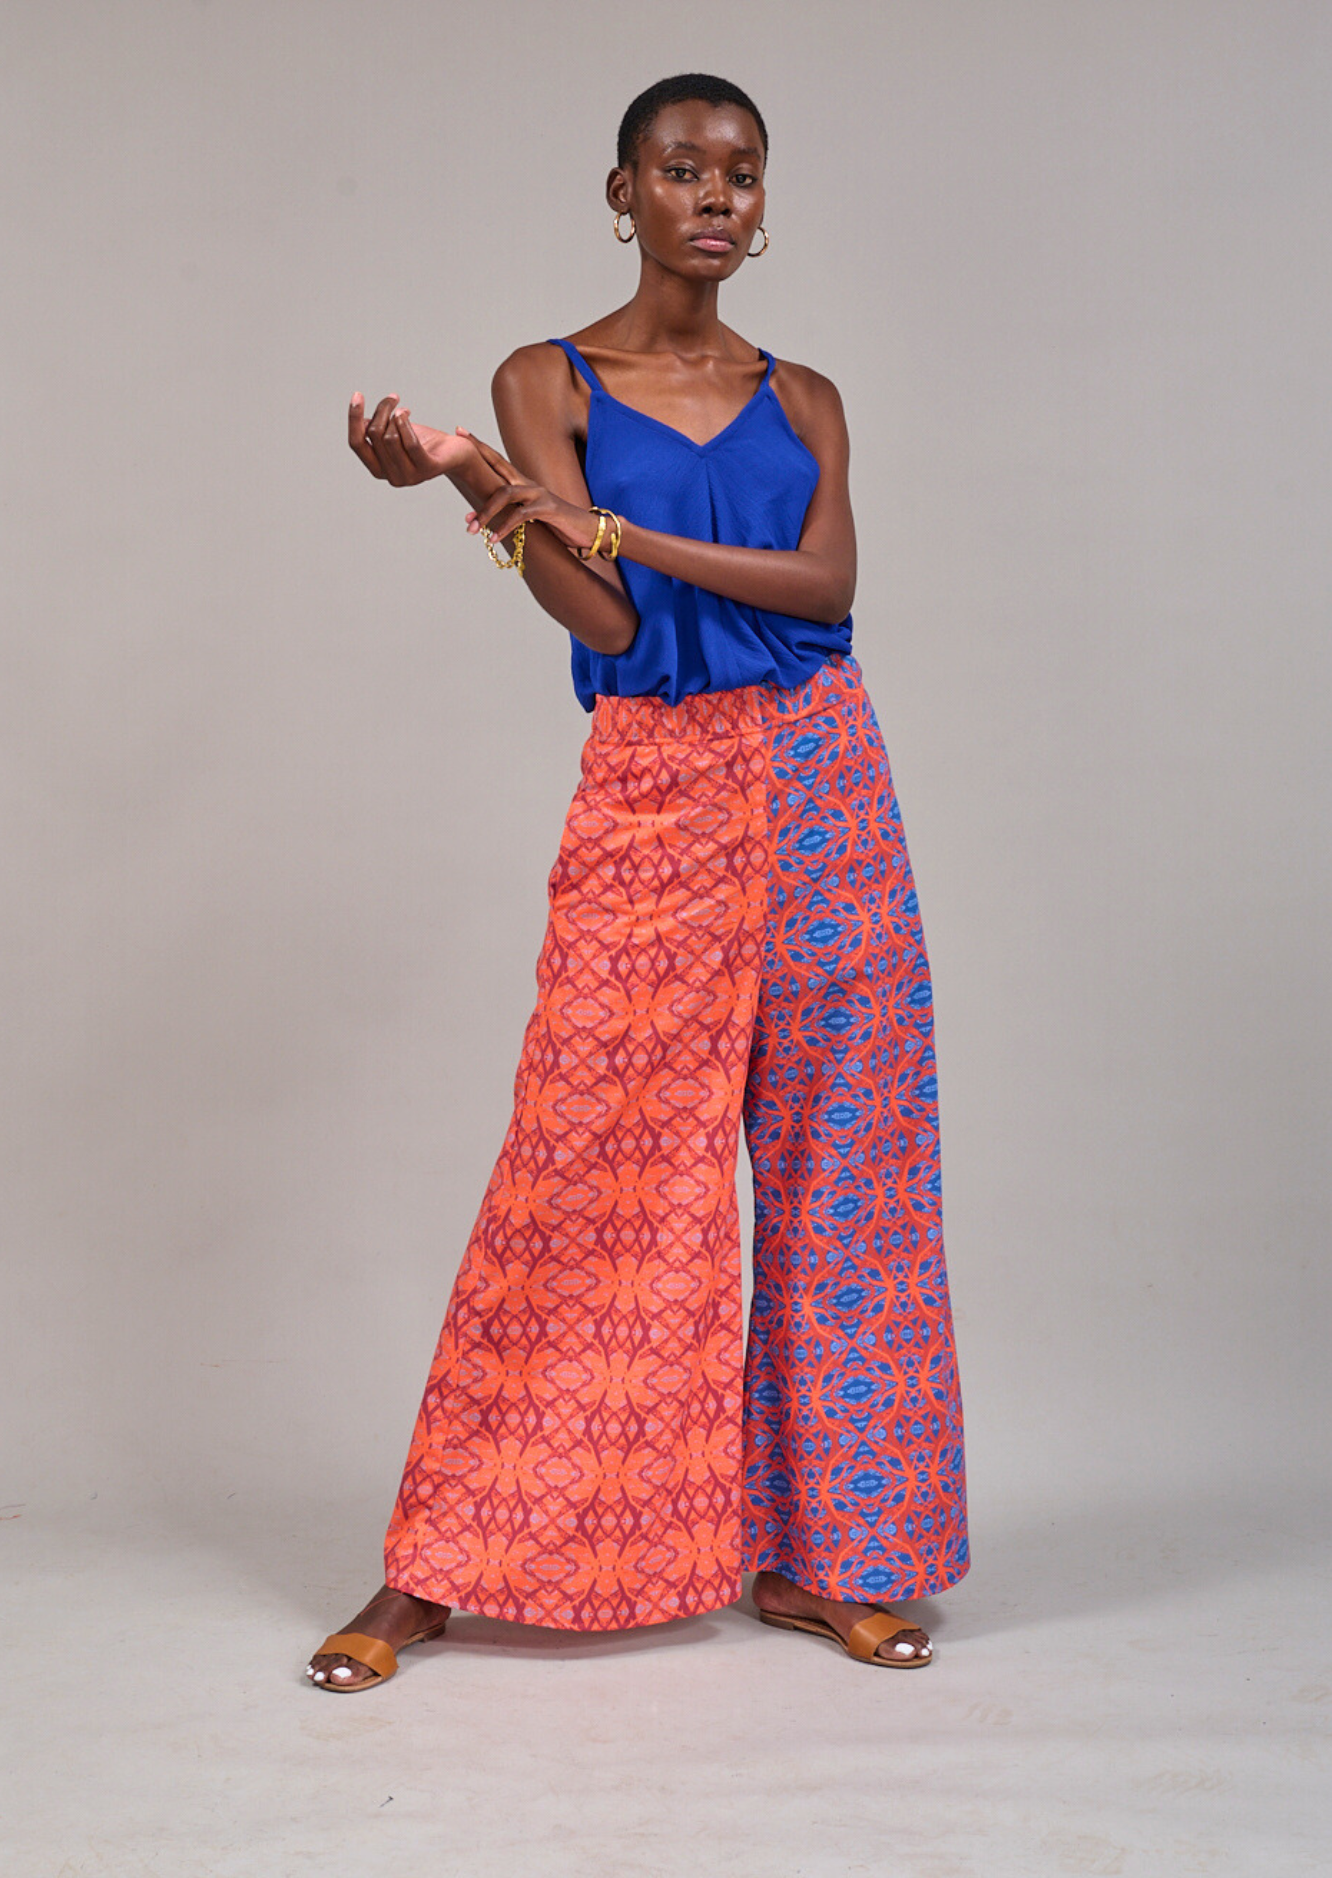 Model standing with raised hands wearing the KAHINDO Sea Cami Top and the Grand Pavilion Pants